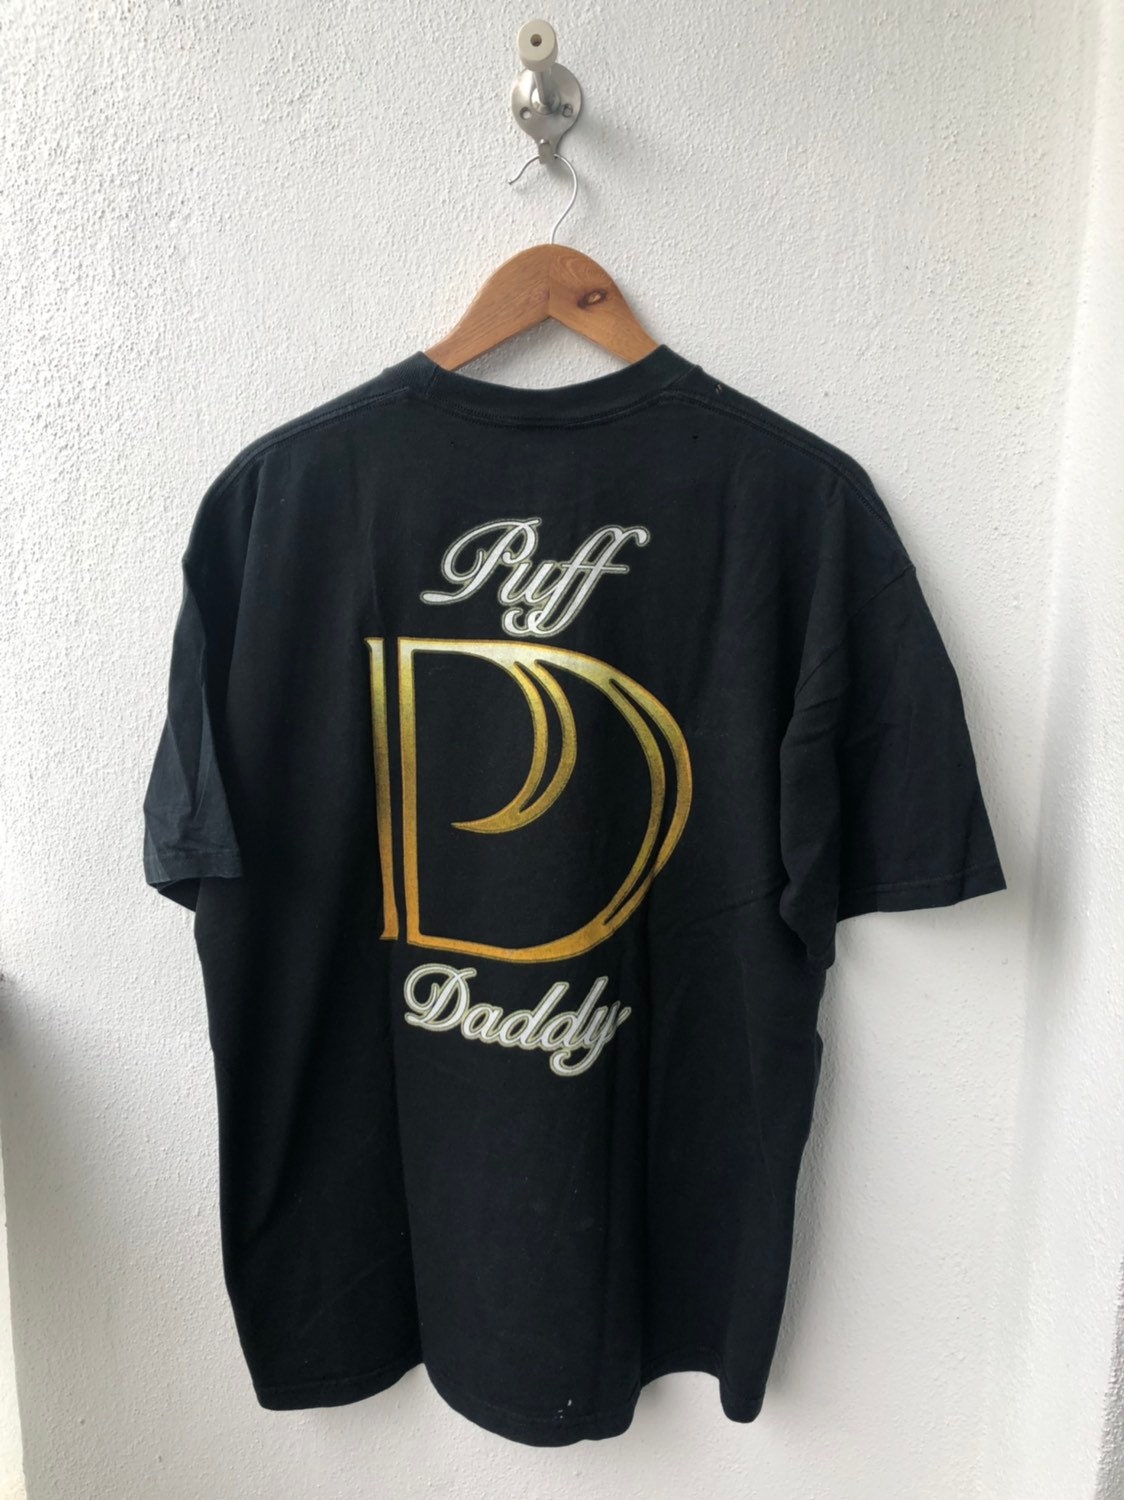 Vintage Sean Combs Puff Daddy 1997 M American Hip | Etsy